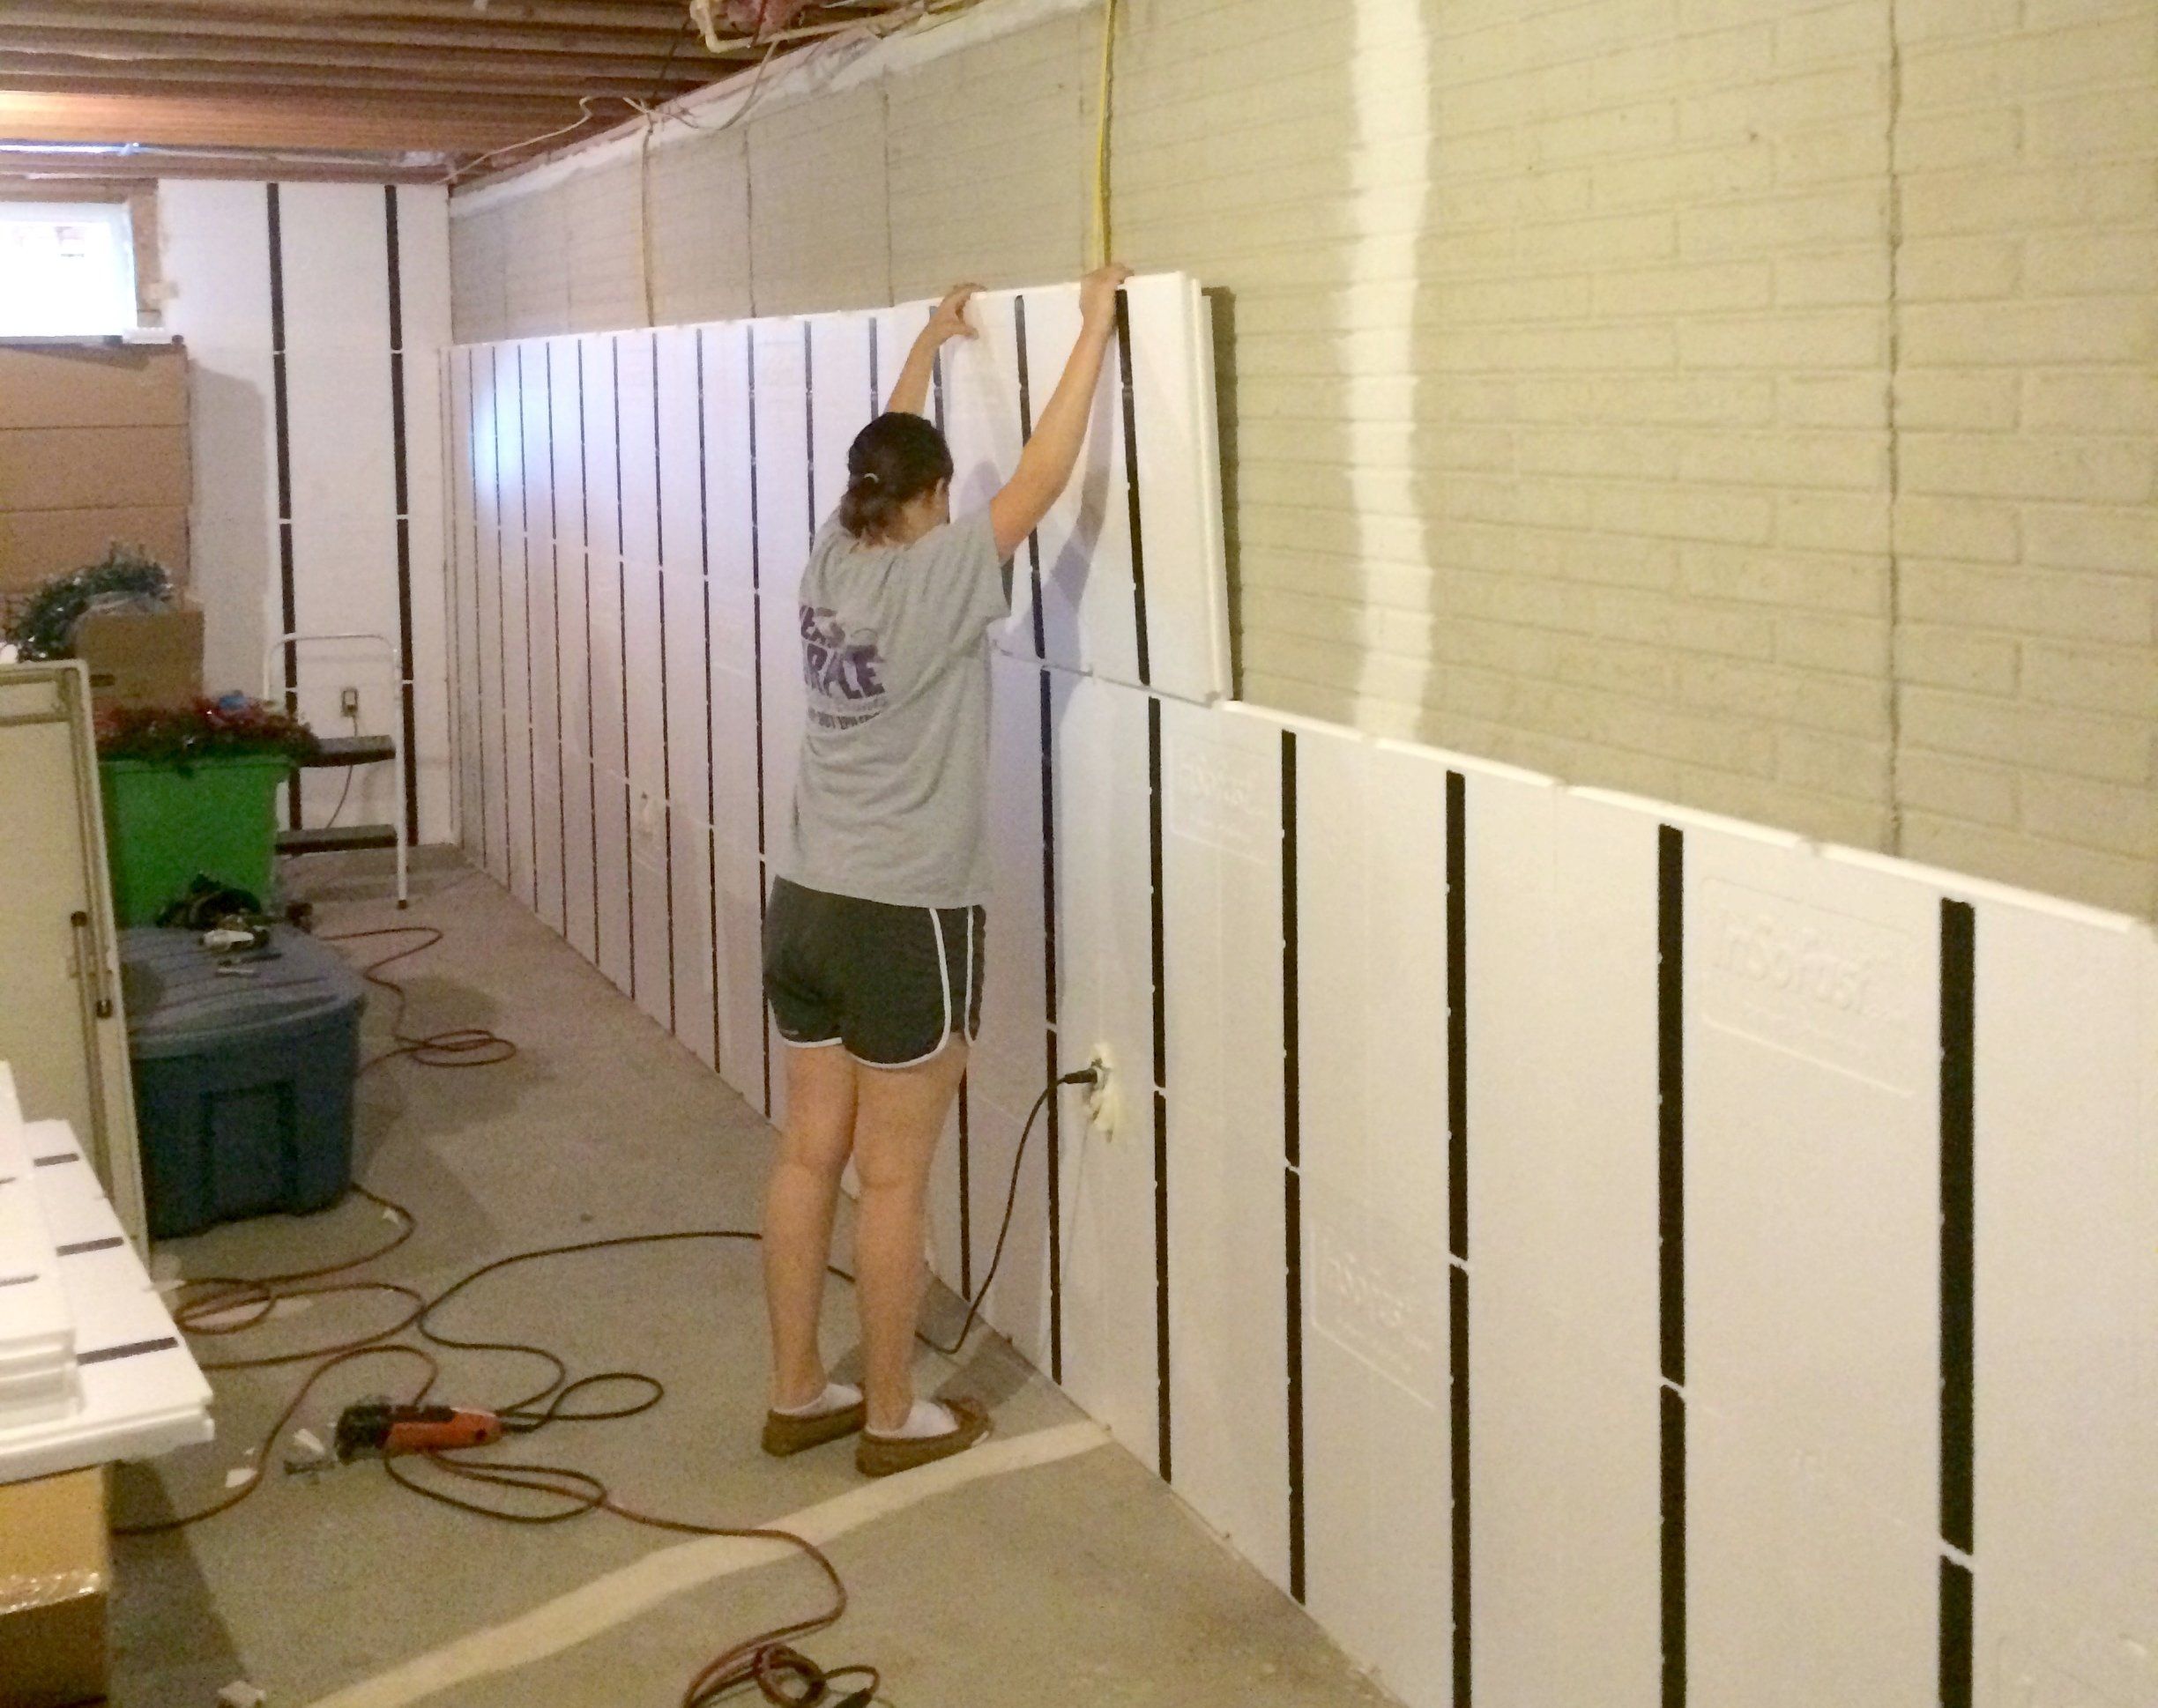 How To Finish Concrete Basement Walls